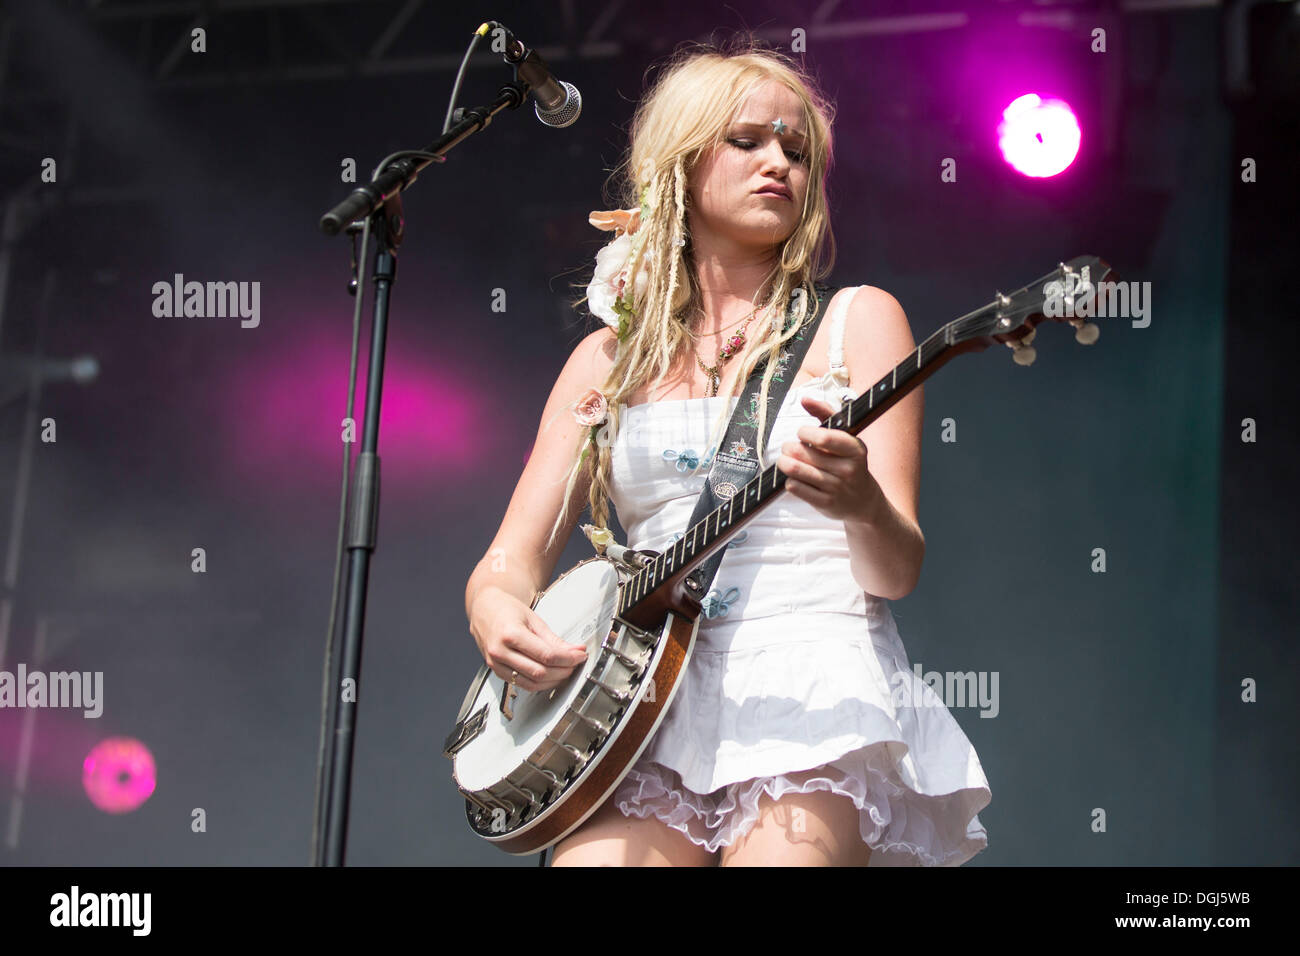 Solveig Heilo with a banjo from the Norwegian girl band Katzenjammer performing live at Heitere Open Air in Zofingen, Aargau Stock Photo